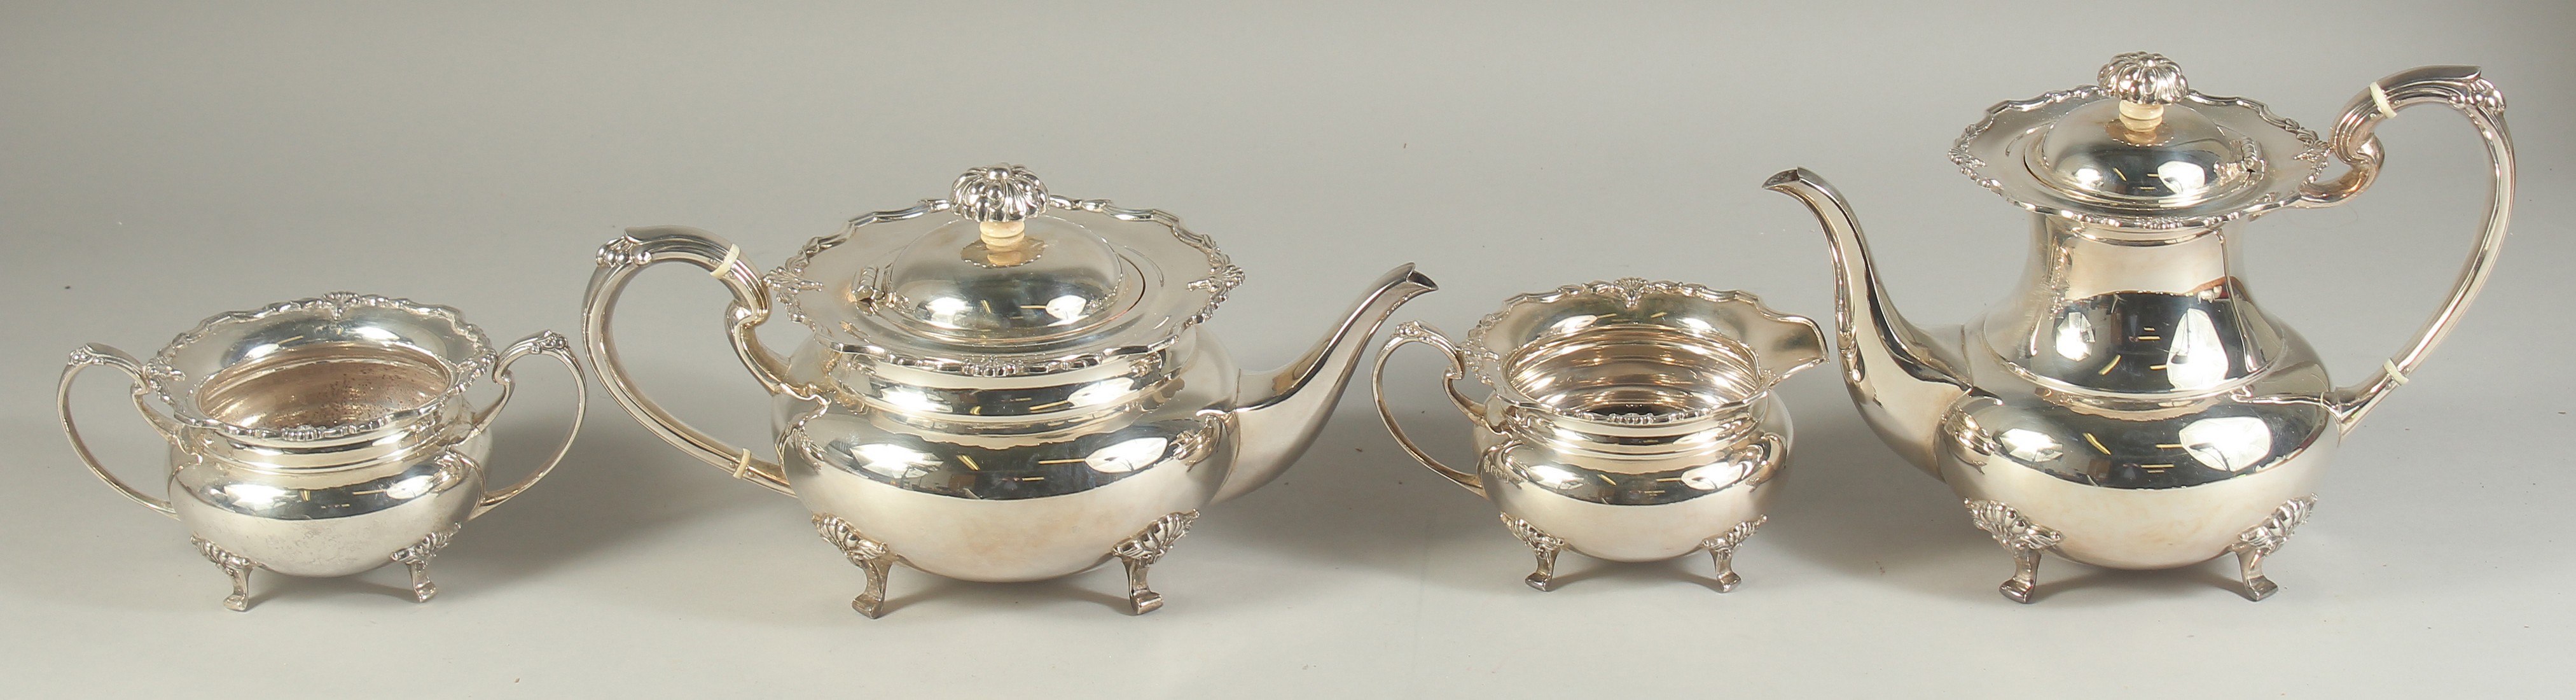 A VERY GOOD FOUR PIECE SILVER CIRCULAR TEA SET of pie crust design with shell mounts, comprising: